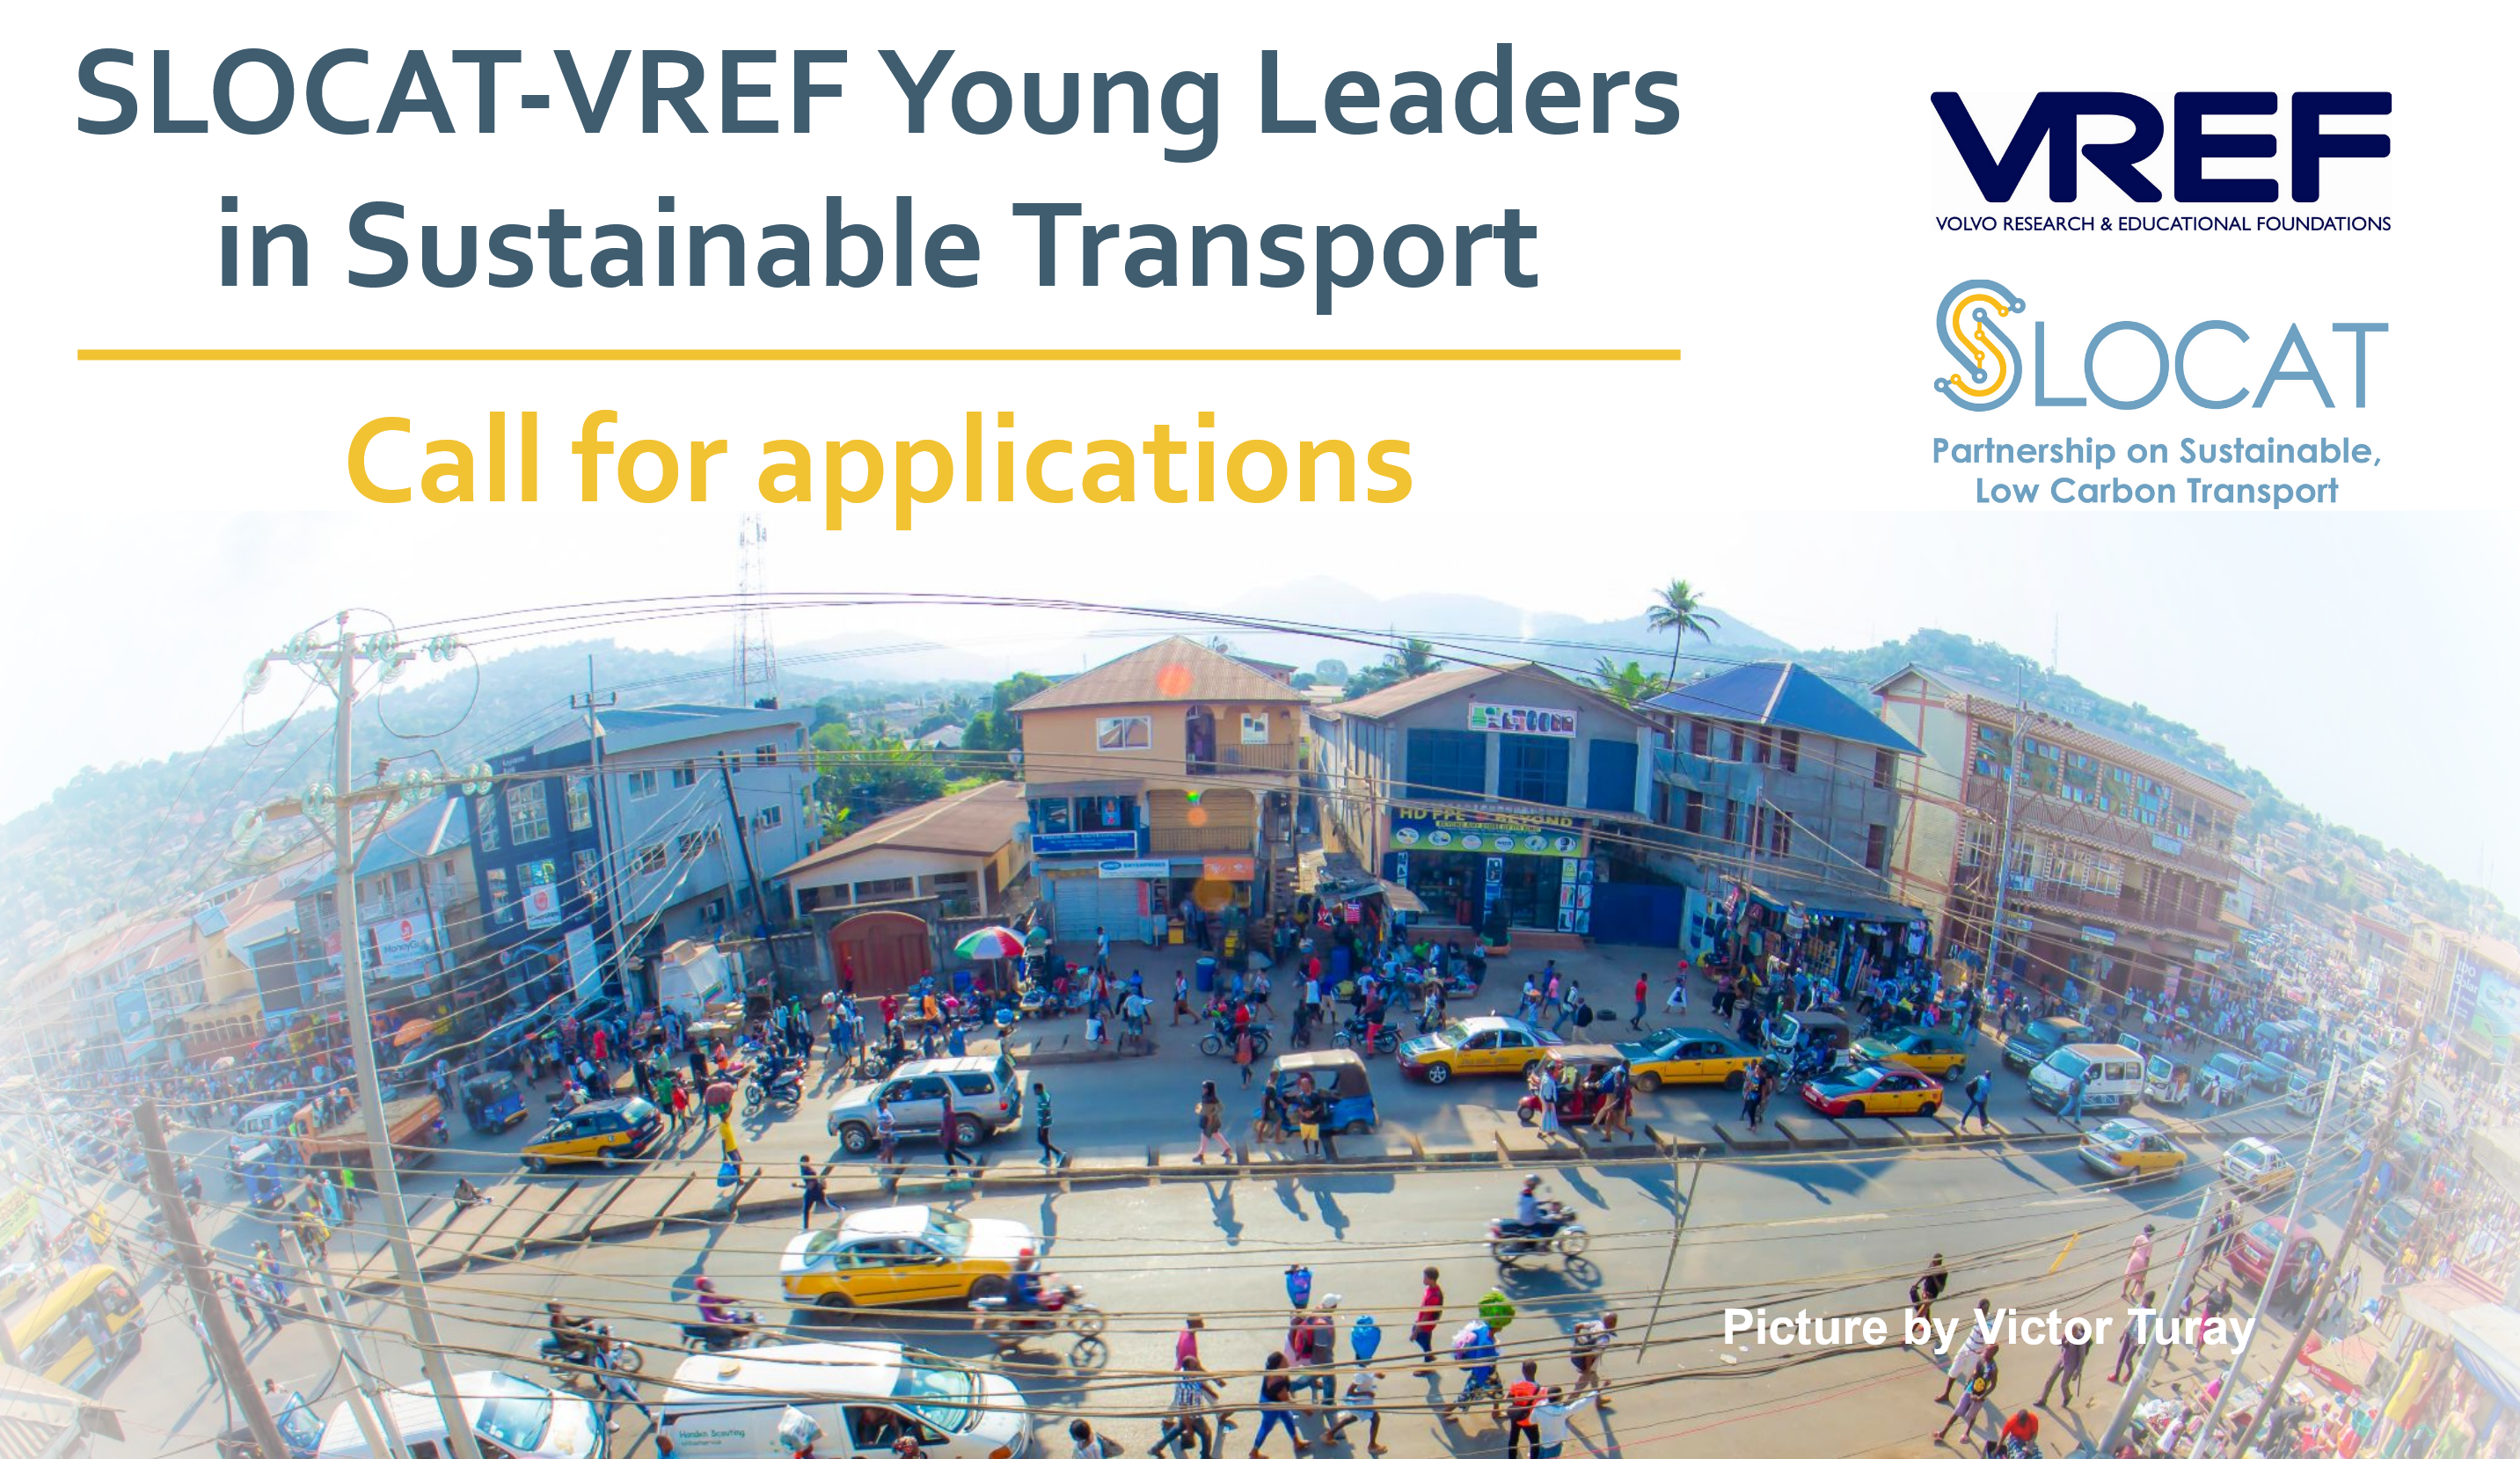 Call for Applications for SLOCAT-VREF Young Leaders in Sustainable Transport 2023 programme